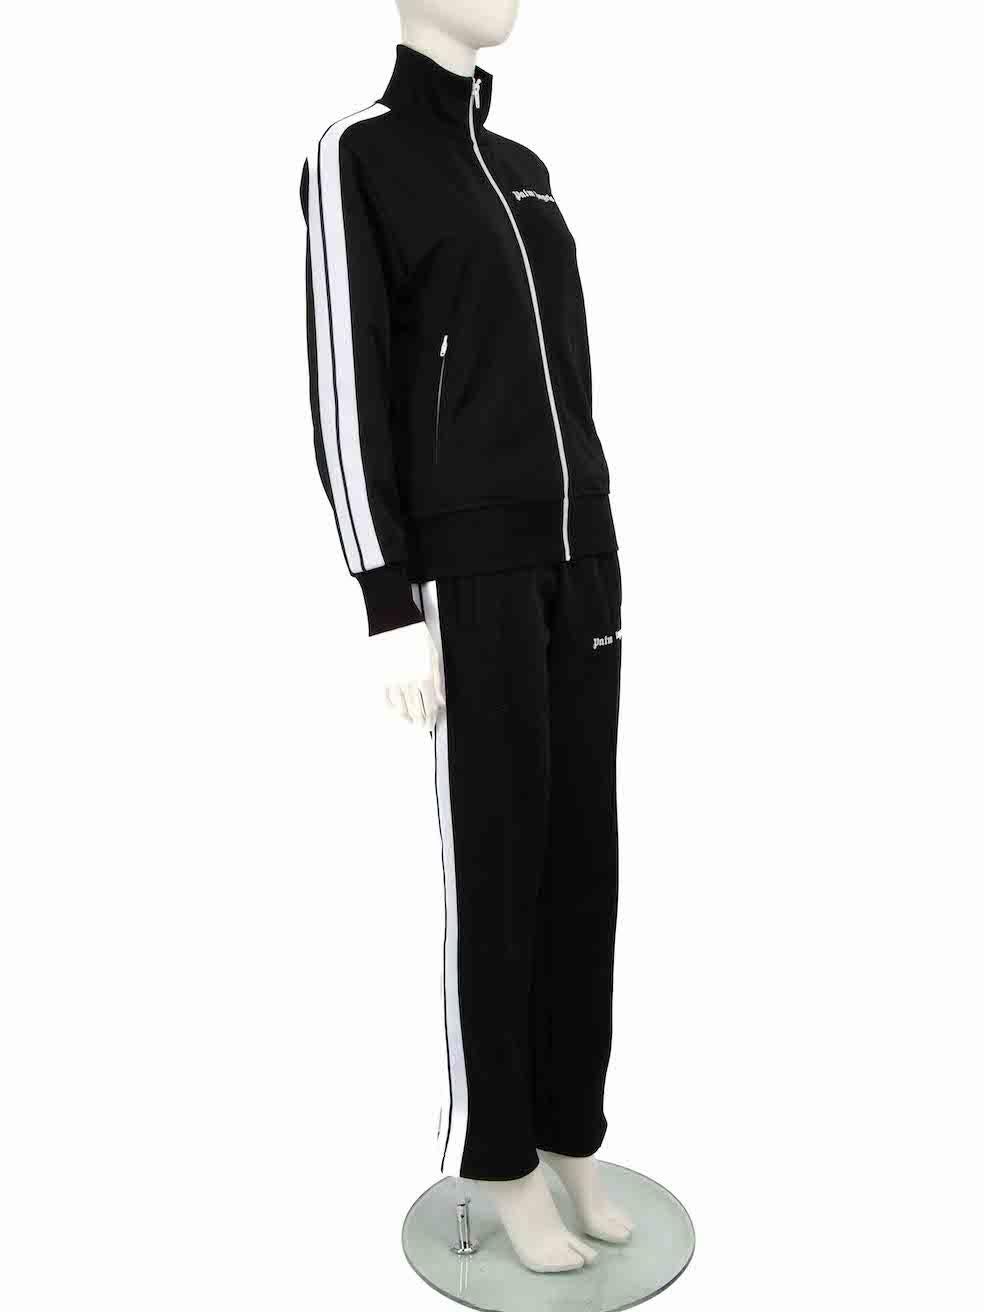 CONDITION is Very good. Hardly any visable wear to set is evident on this used Palm Angels designer resale item.
 
 
 
 Details
 
 
 Black
 
 Polyester
 
 Tracksuit set
 
 Striped and logo detail
 
 Track jacket
 
 Front zip closure
 
 2x Front side